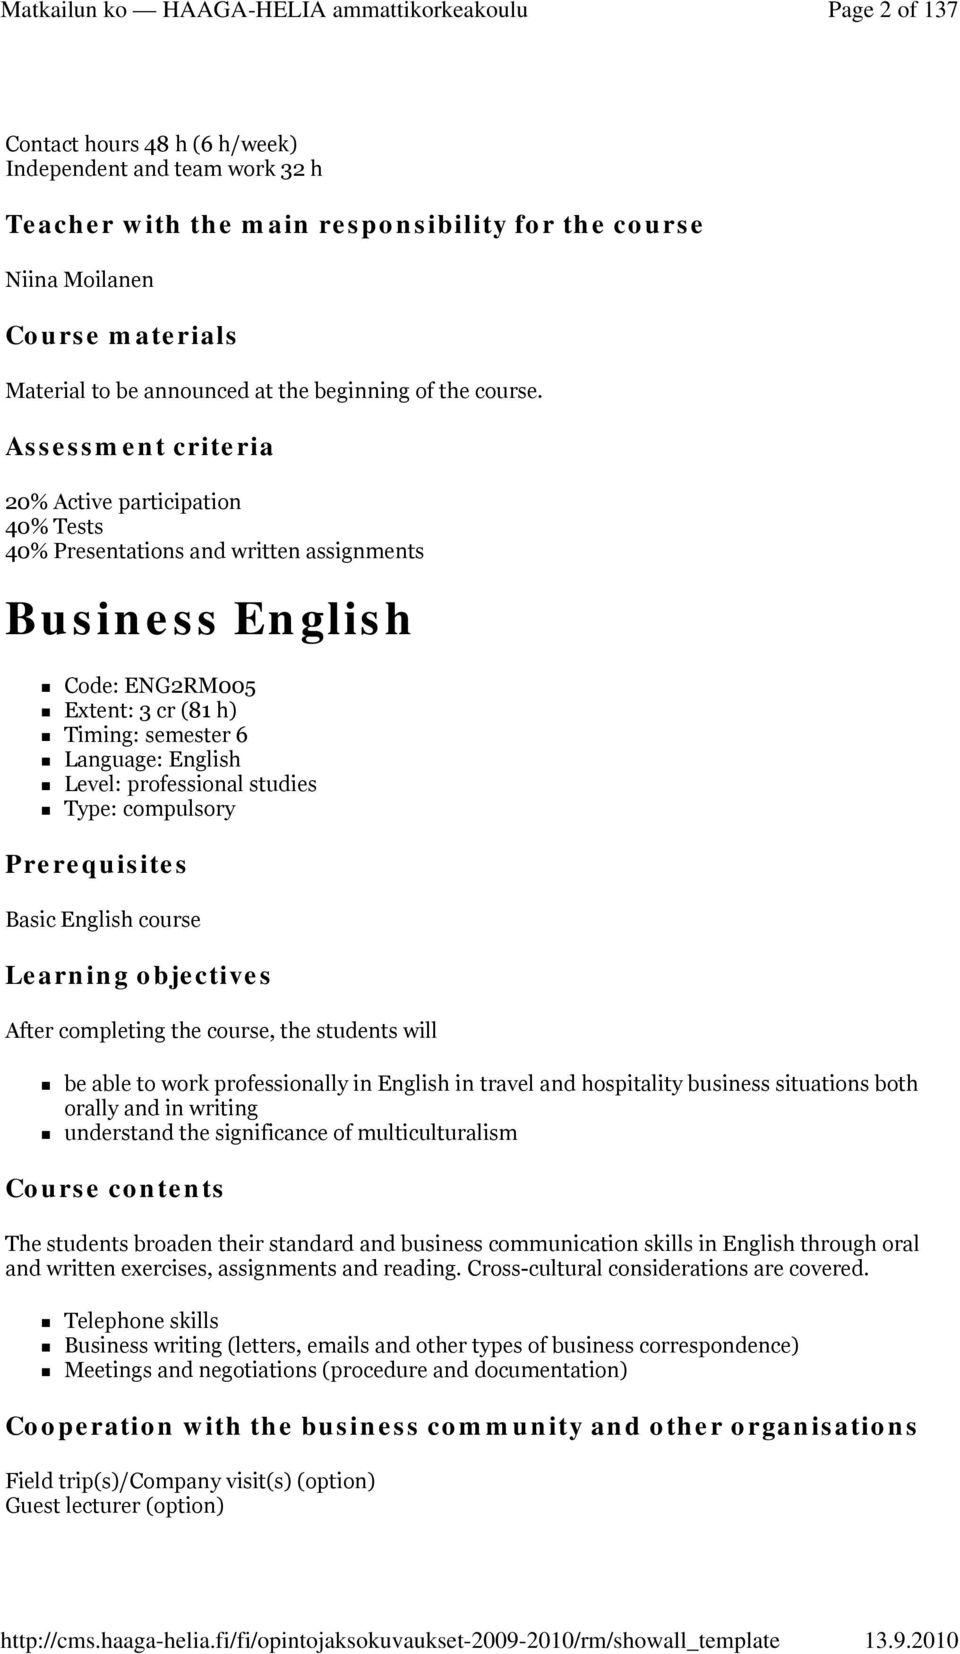 Assessment criteria 20% Active participation 40% Tests 40% Presentations and written assignments Business English Code: ENG2RM005 Extent: 3 cr (81 h) Timing: semester 6 Language: English Level: